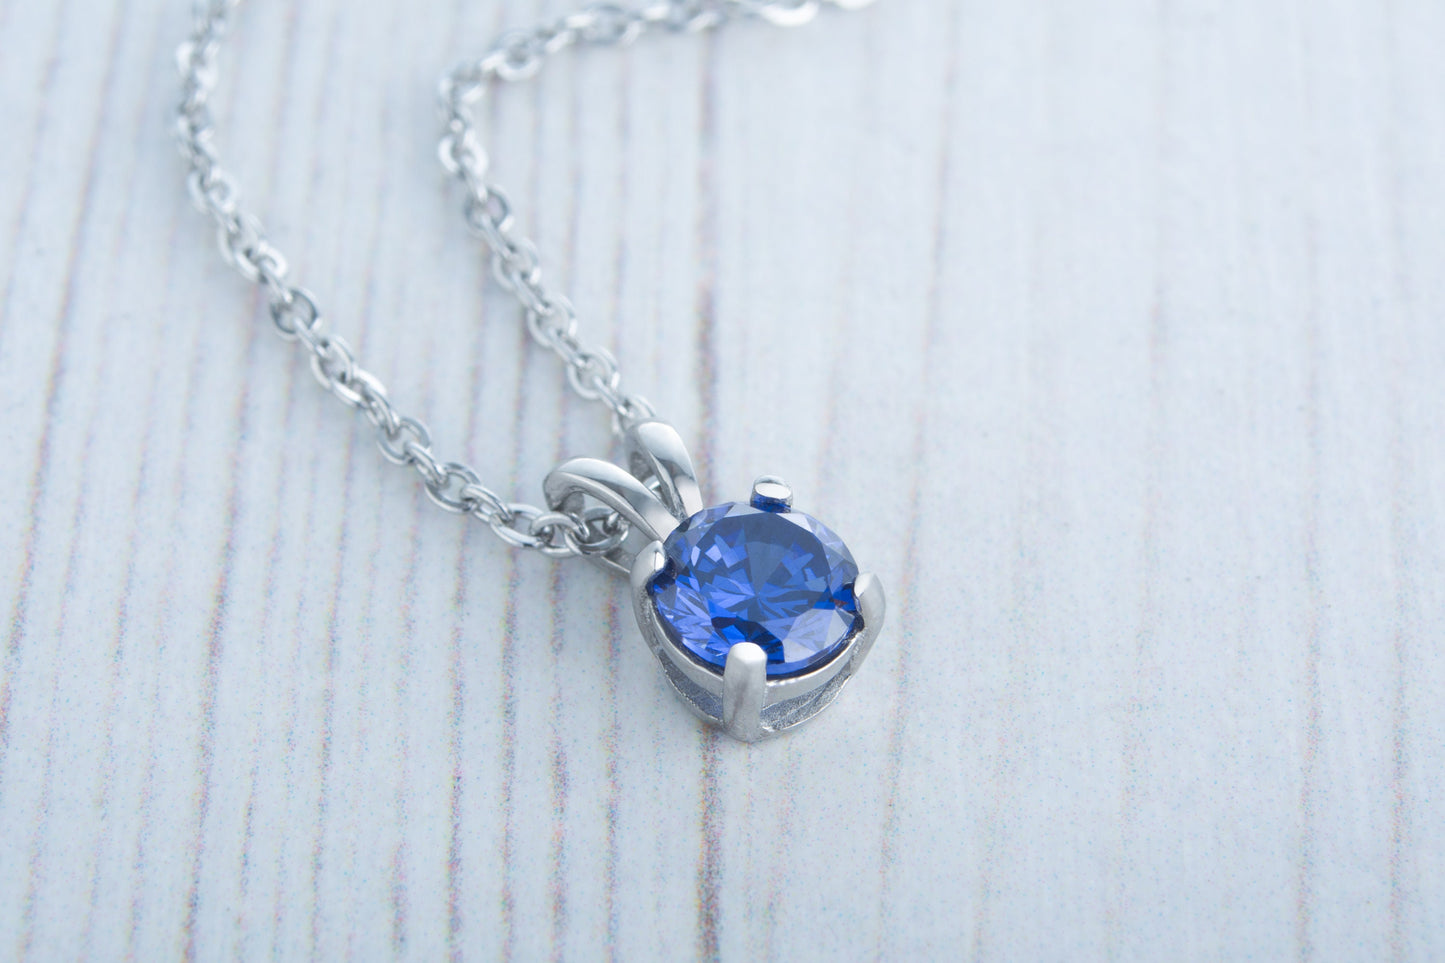 Genuine London Blue Topaz Pendant Necklace - in 4mm, 5mm, 6mm, 7mm - Available in titanium